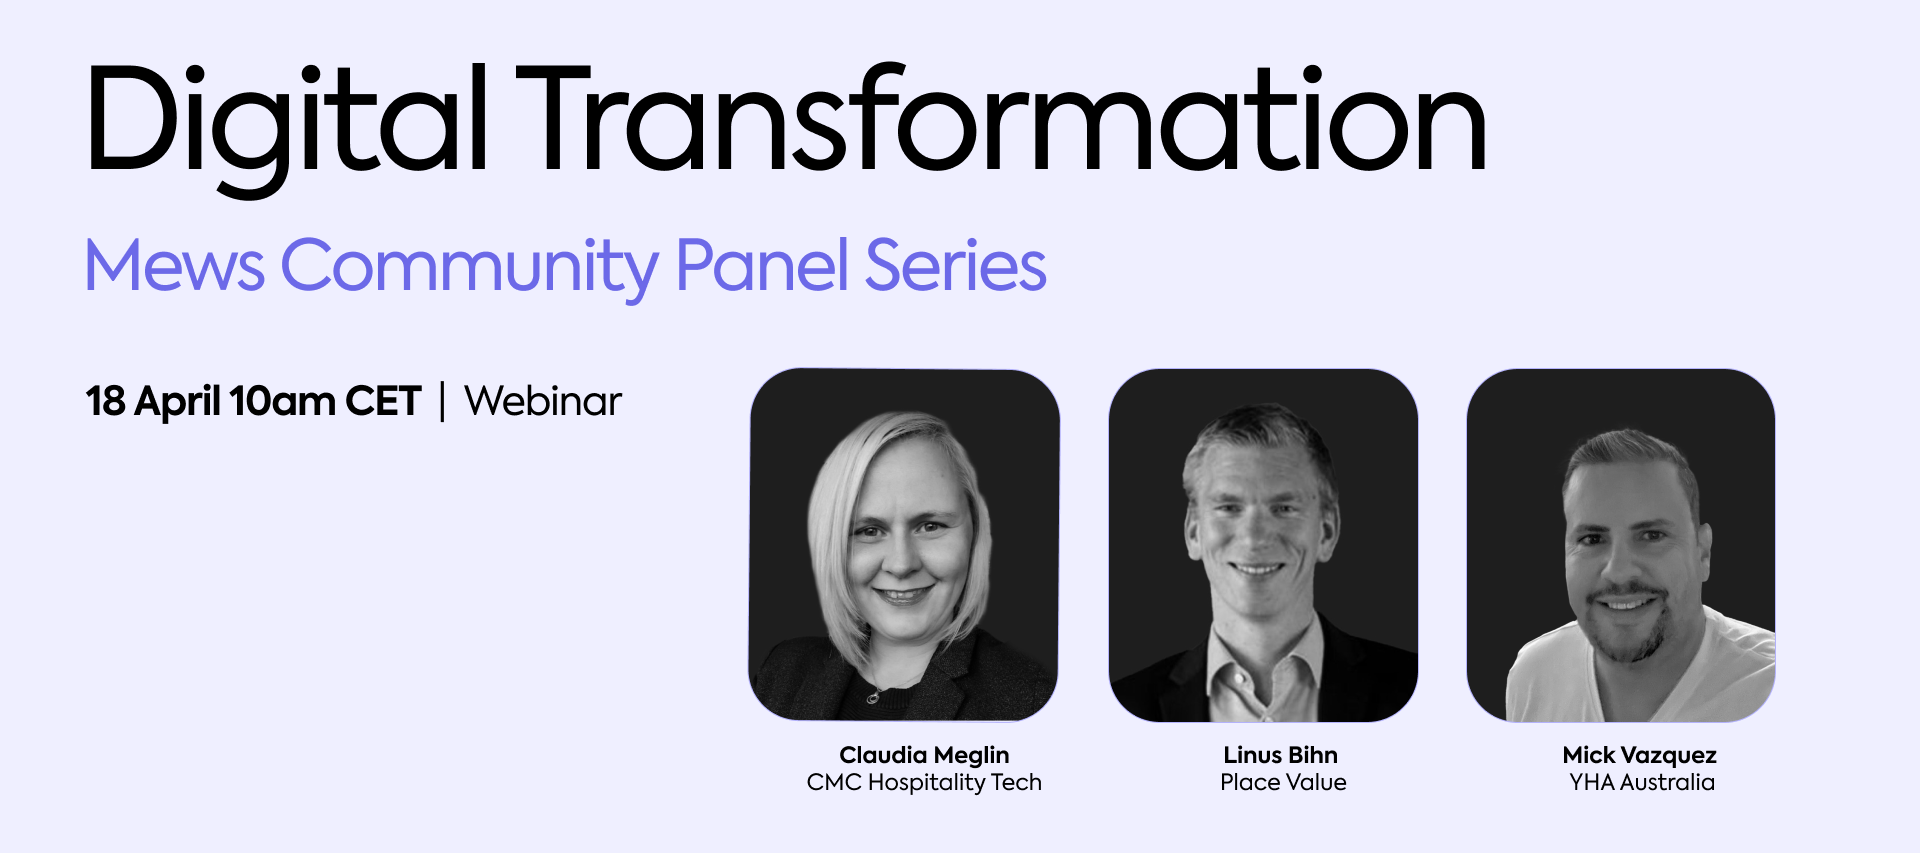 Exciting News for Our Community! Join the Digital Transformation Discussion in Our Online Event!